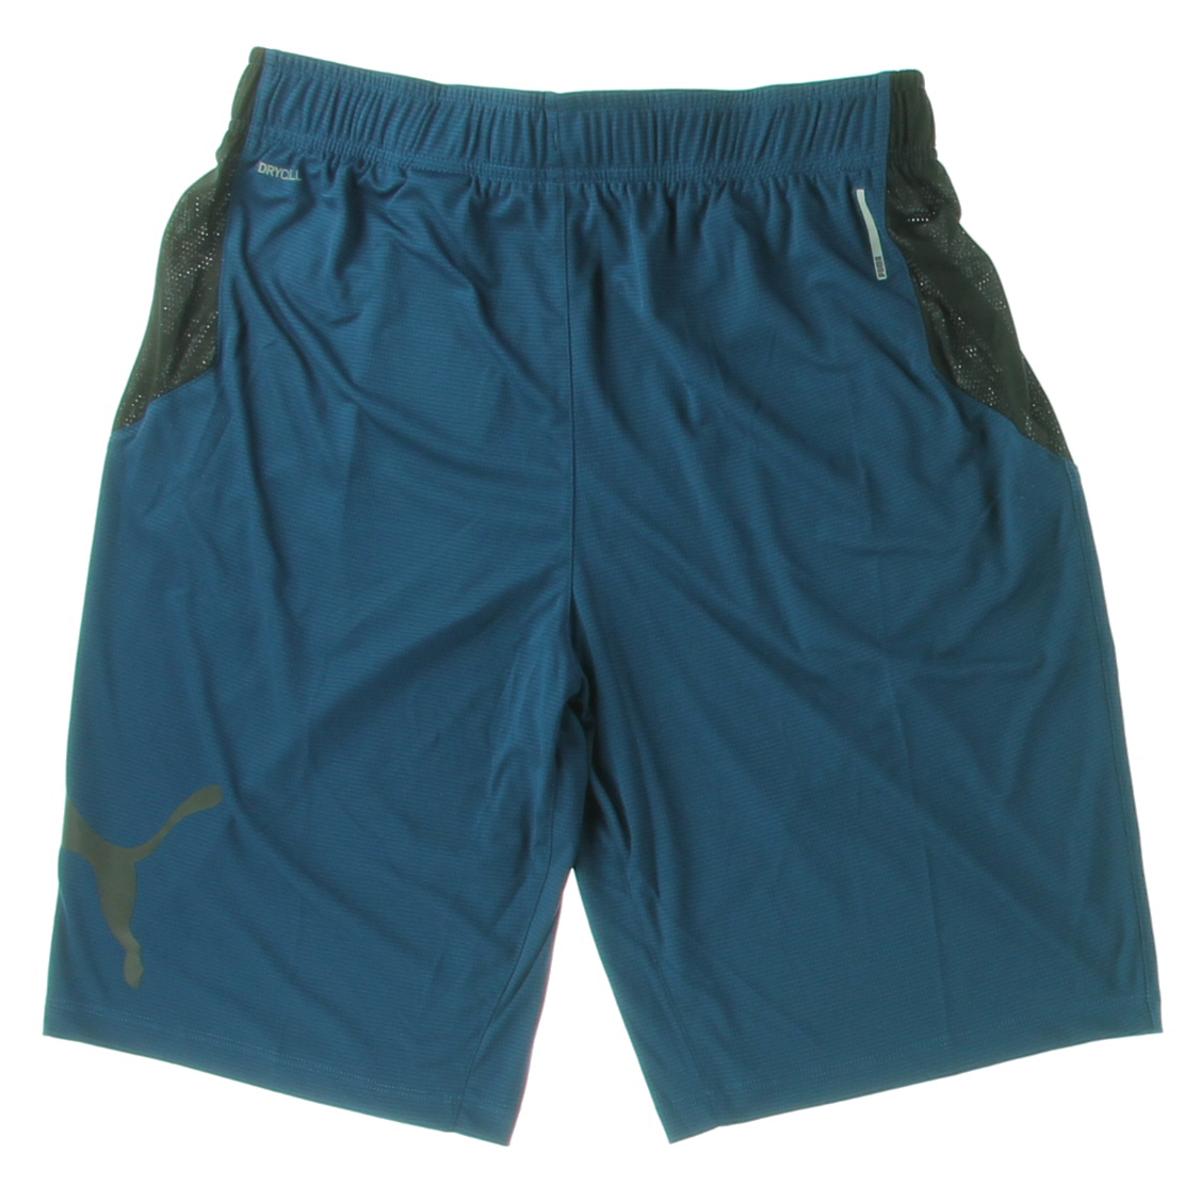  Puma Workout Shorts for Weight Loss